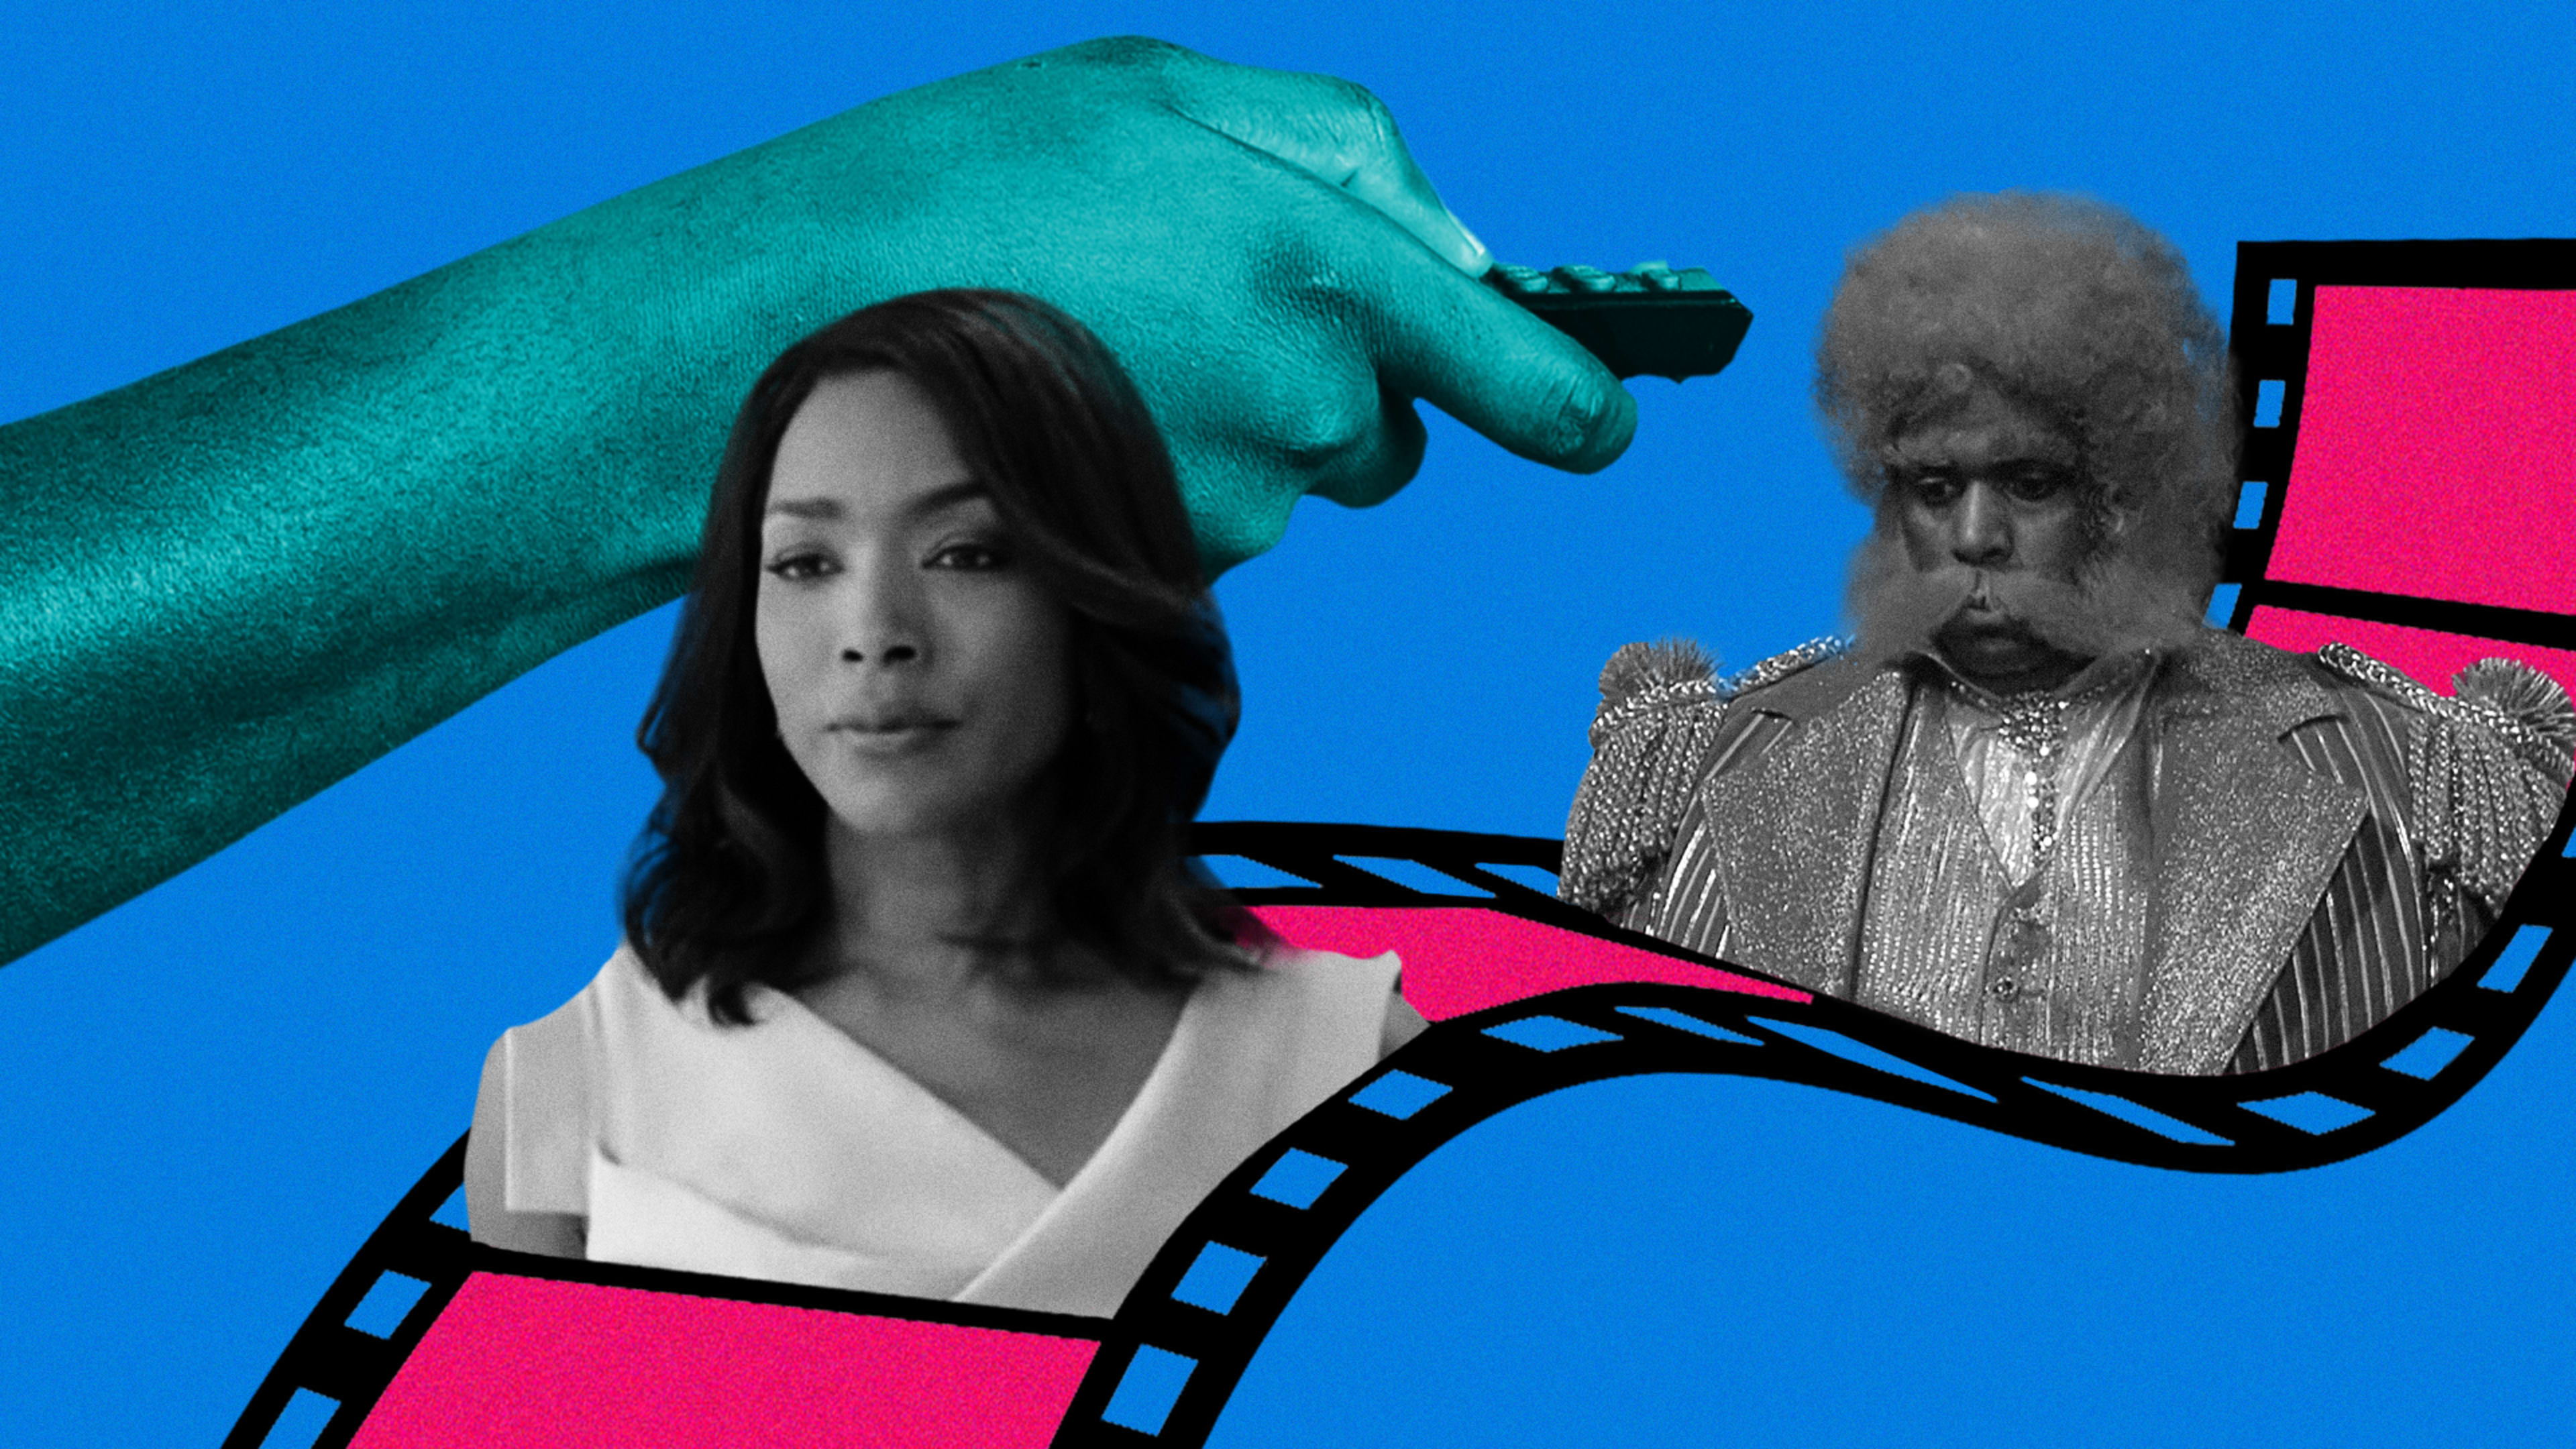 49 Black movies to watch that will spark joy